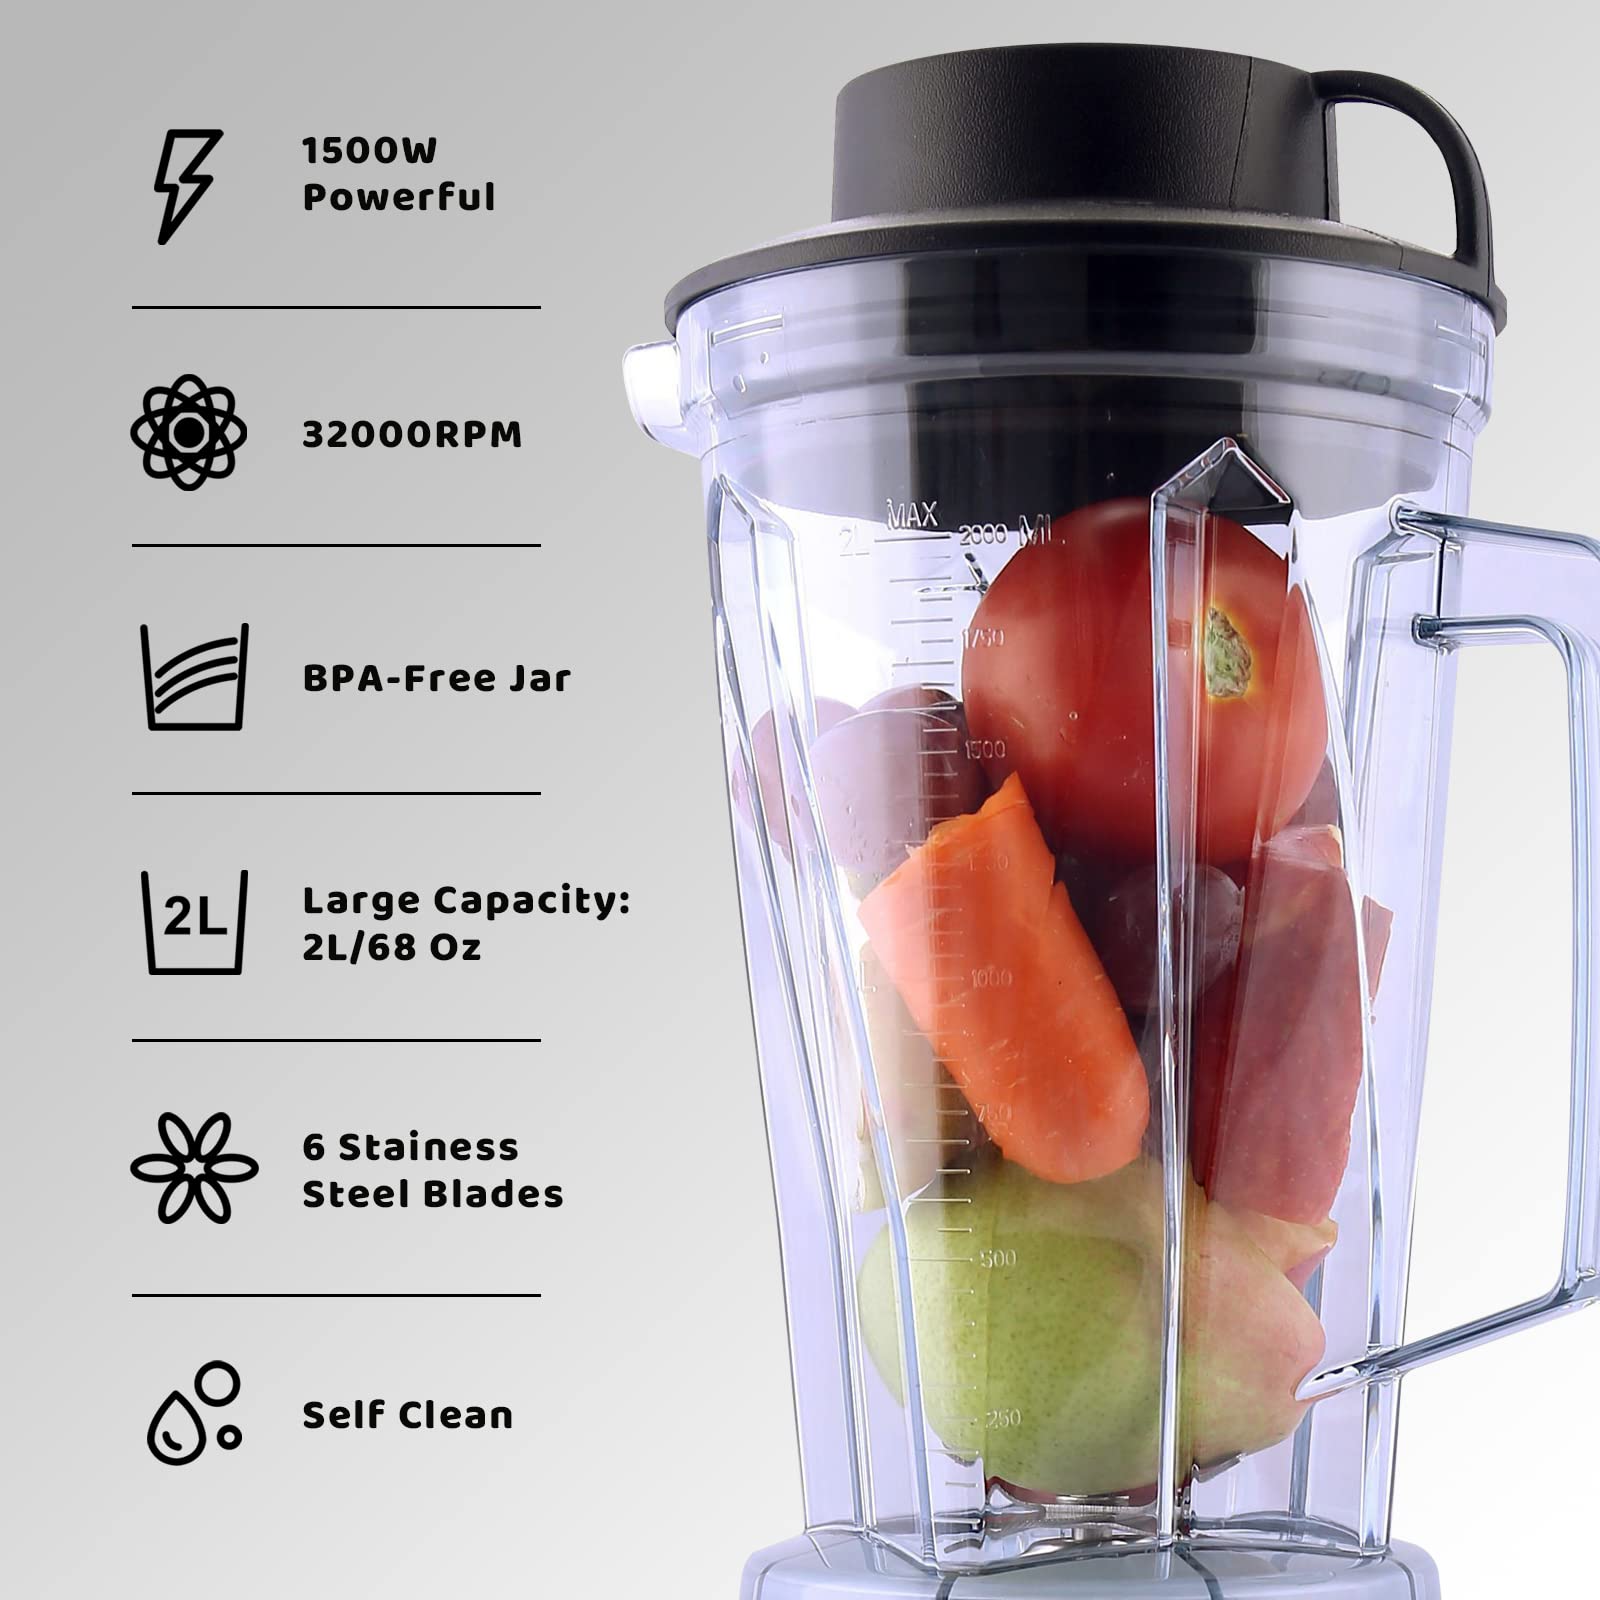 Hakka 2L Countertop Blender Juicer Shakes and Smoothies 8 Cups Fruit Maker 1500W